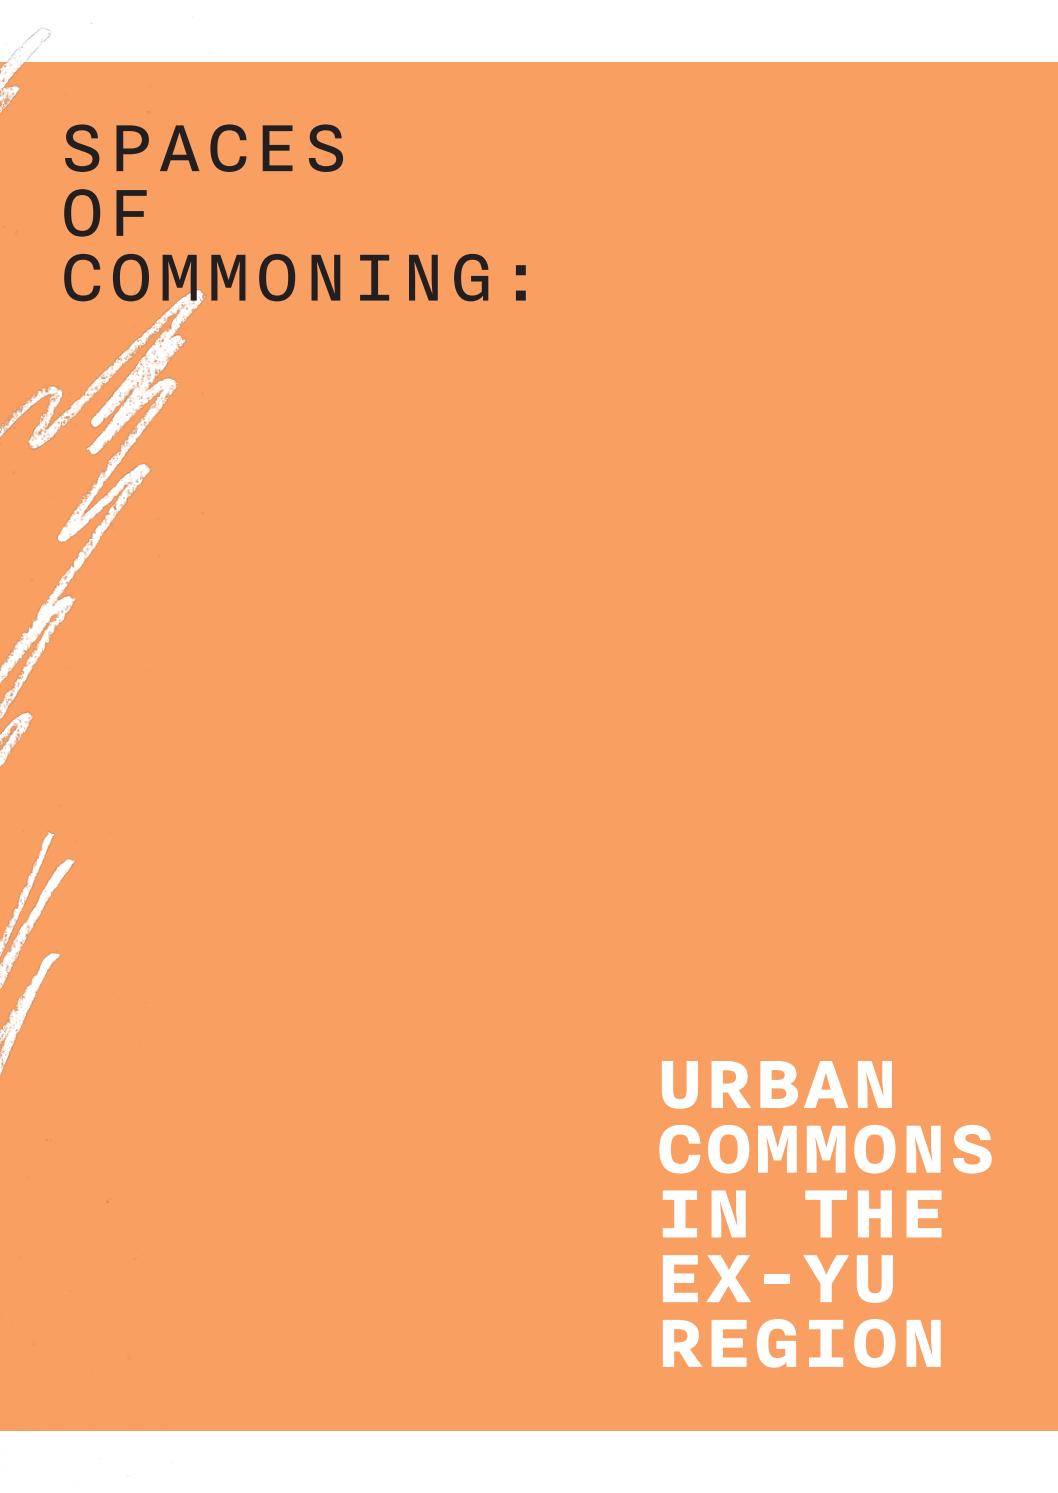 SPACES OF COMMONING: URBAN COMMONS IN THE EX-YU REGION